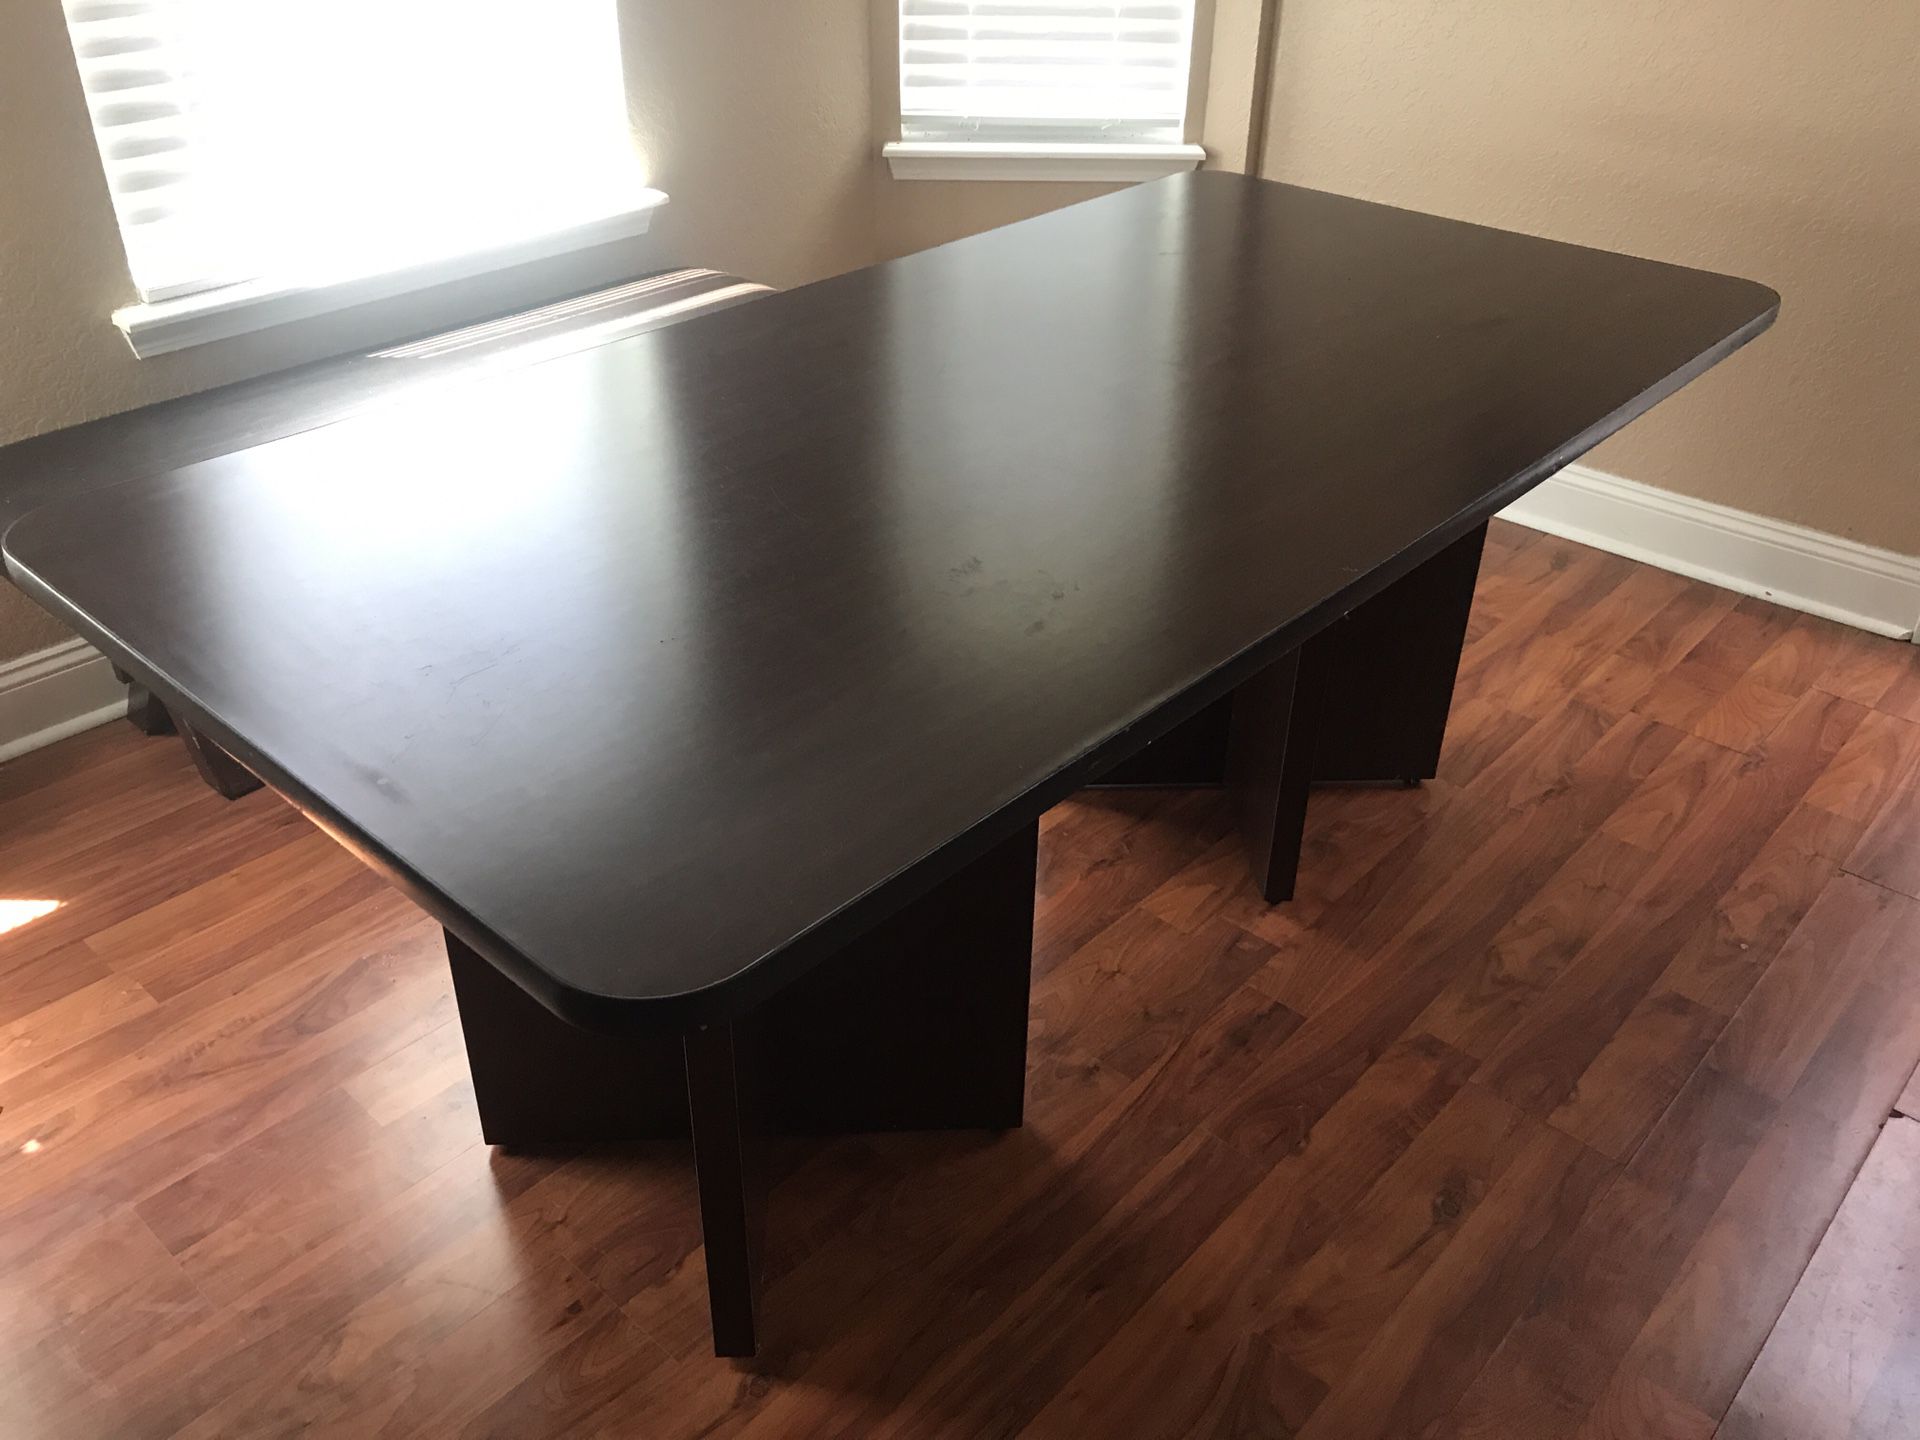 Dining room table 6’x3’ no chairs